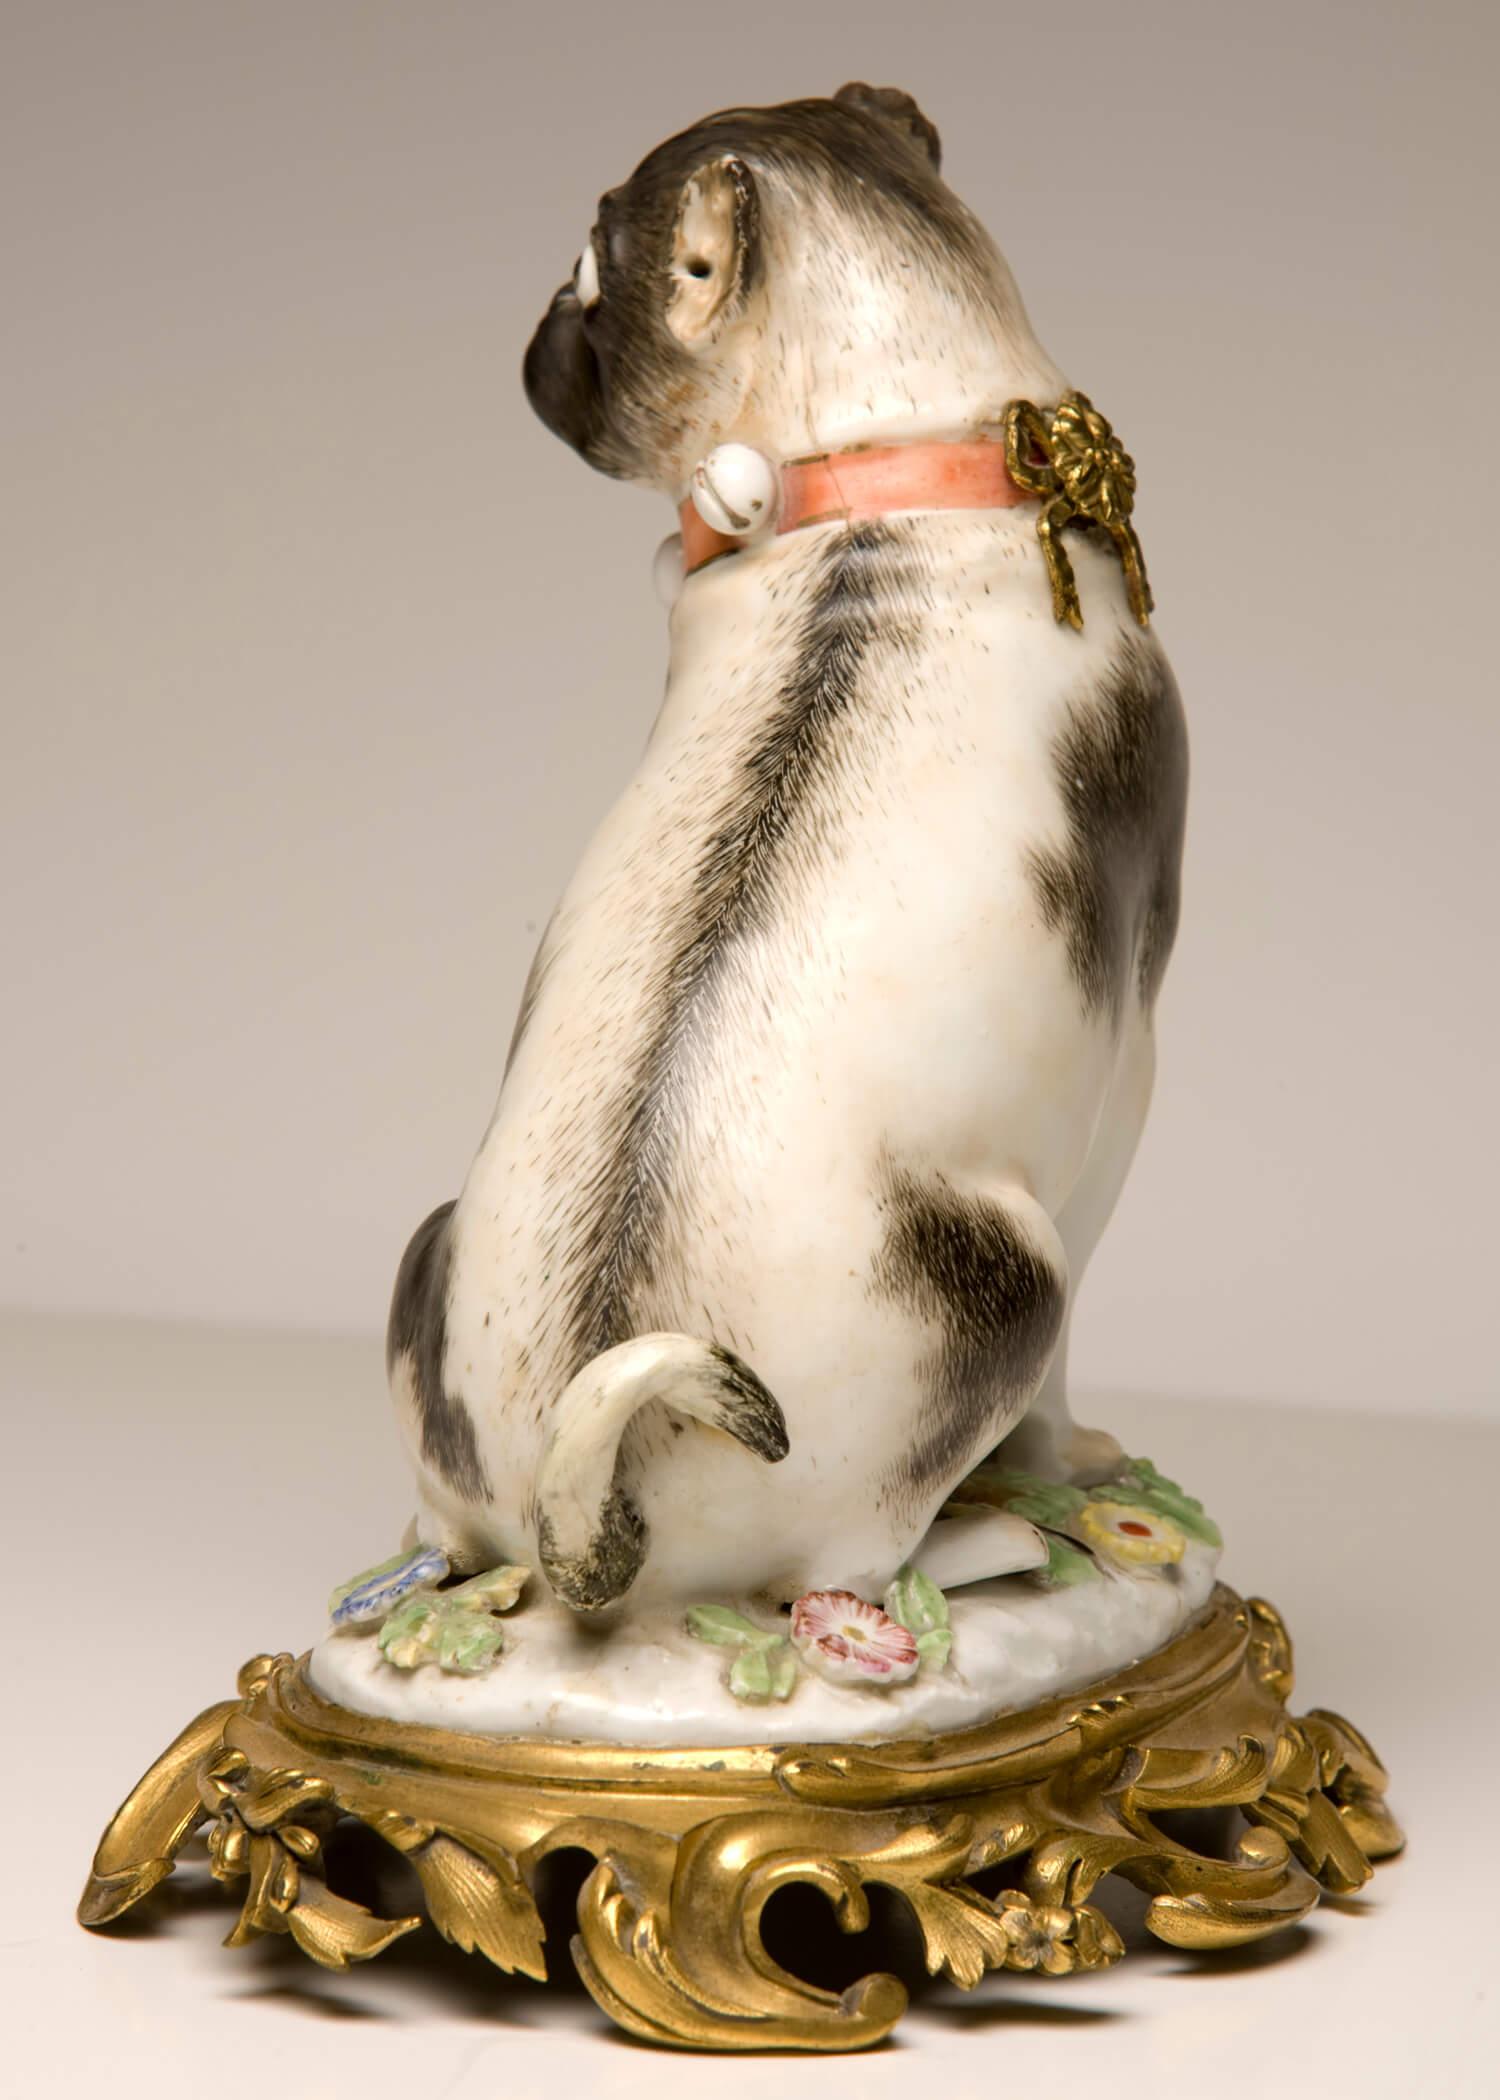 A fine Meissen pug dog modelled by Kaendler, on a gilt bronze rococo base. Please note at least two repairs, one to the tail and secondly the ornament at the back of the dogs head replaces a porcelain ball.